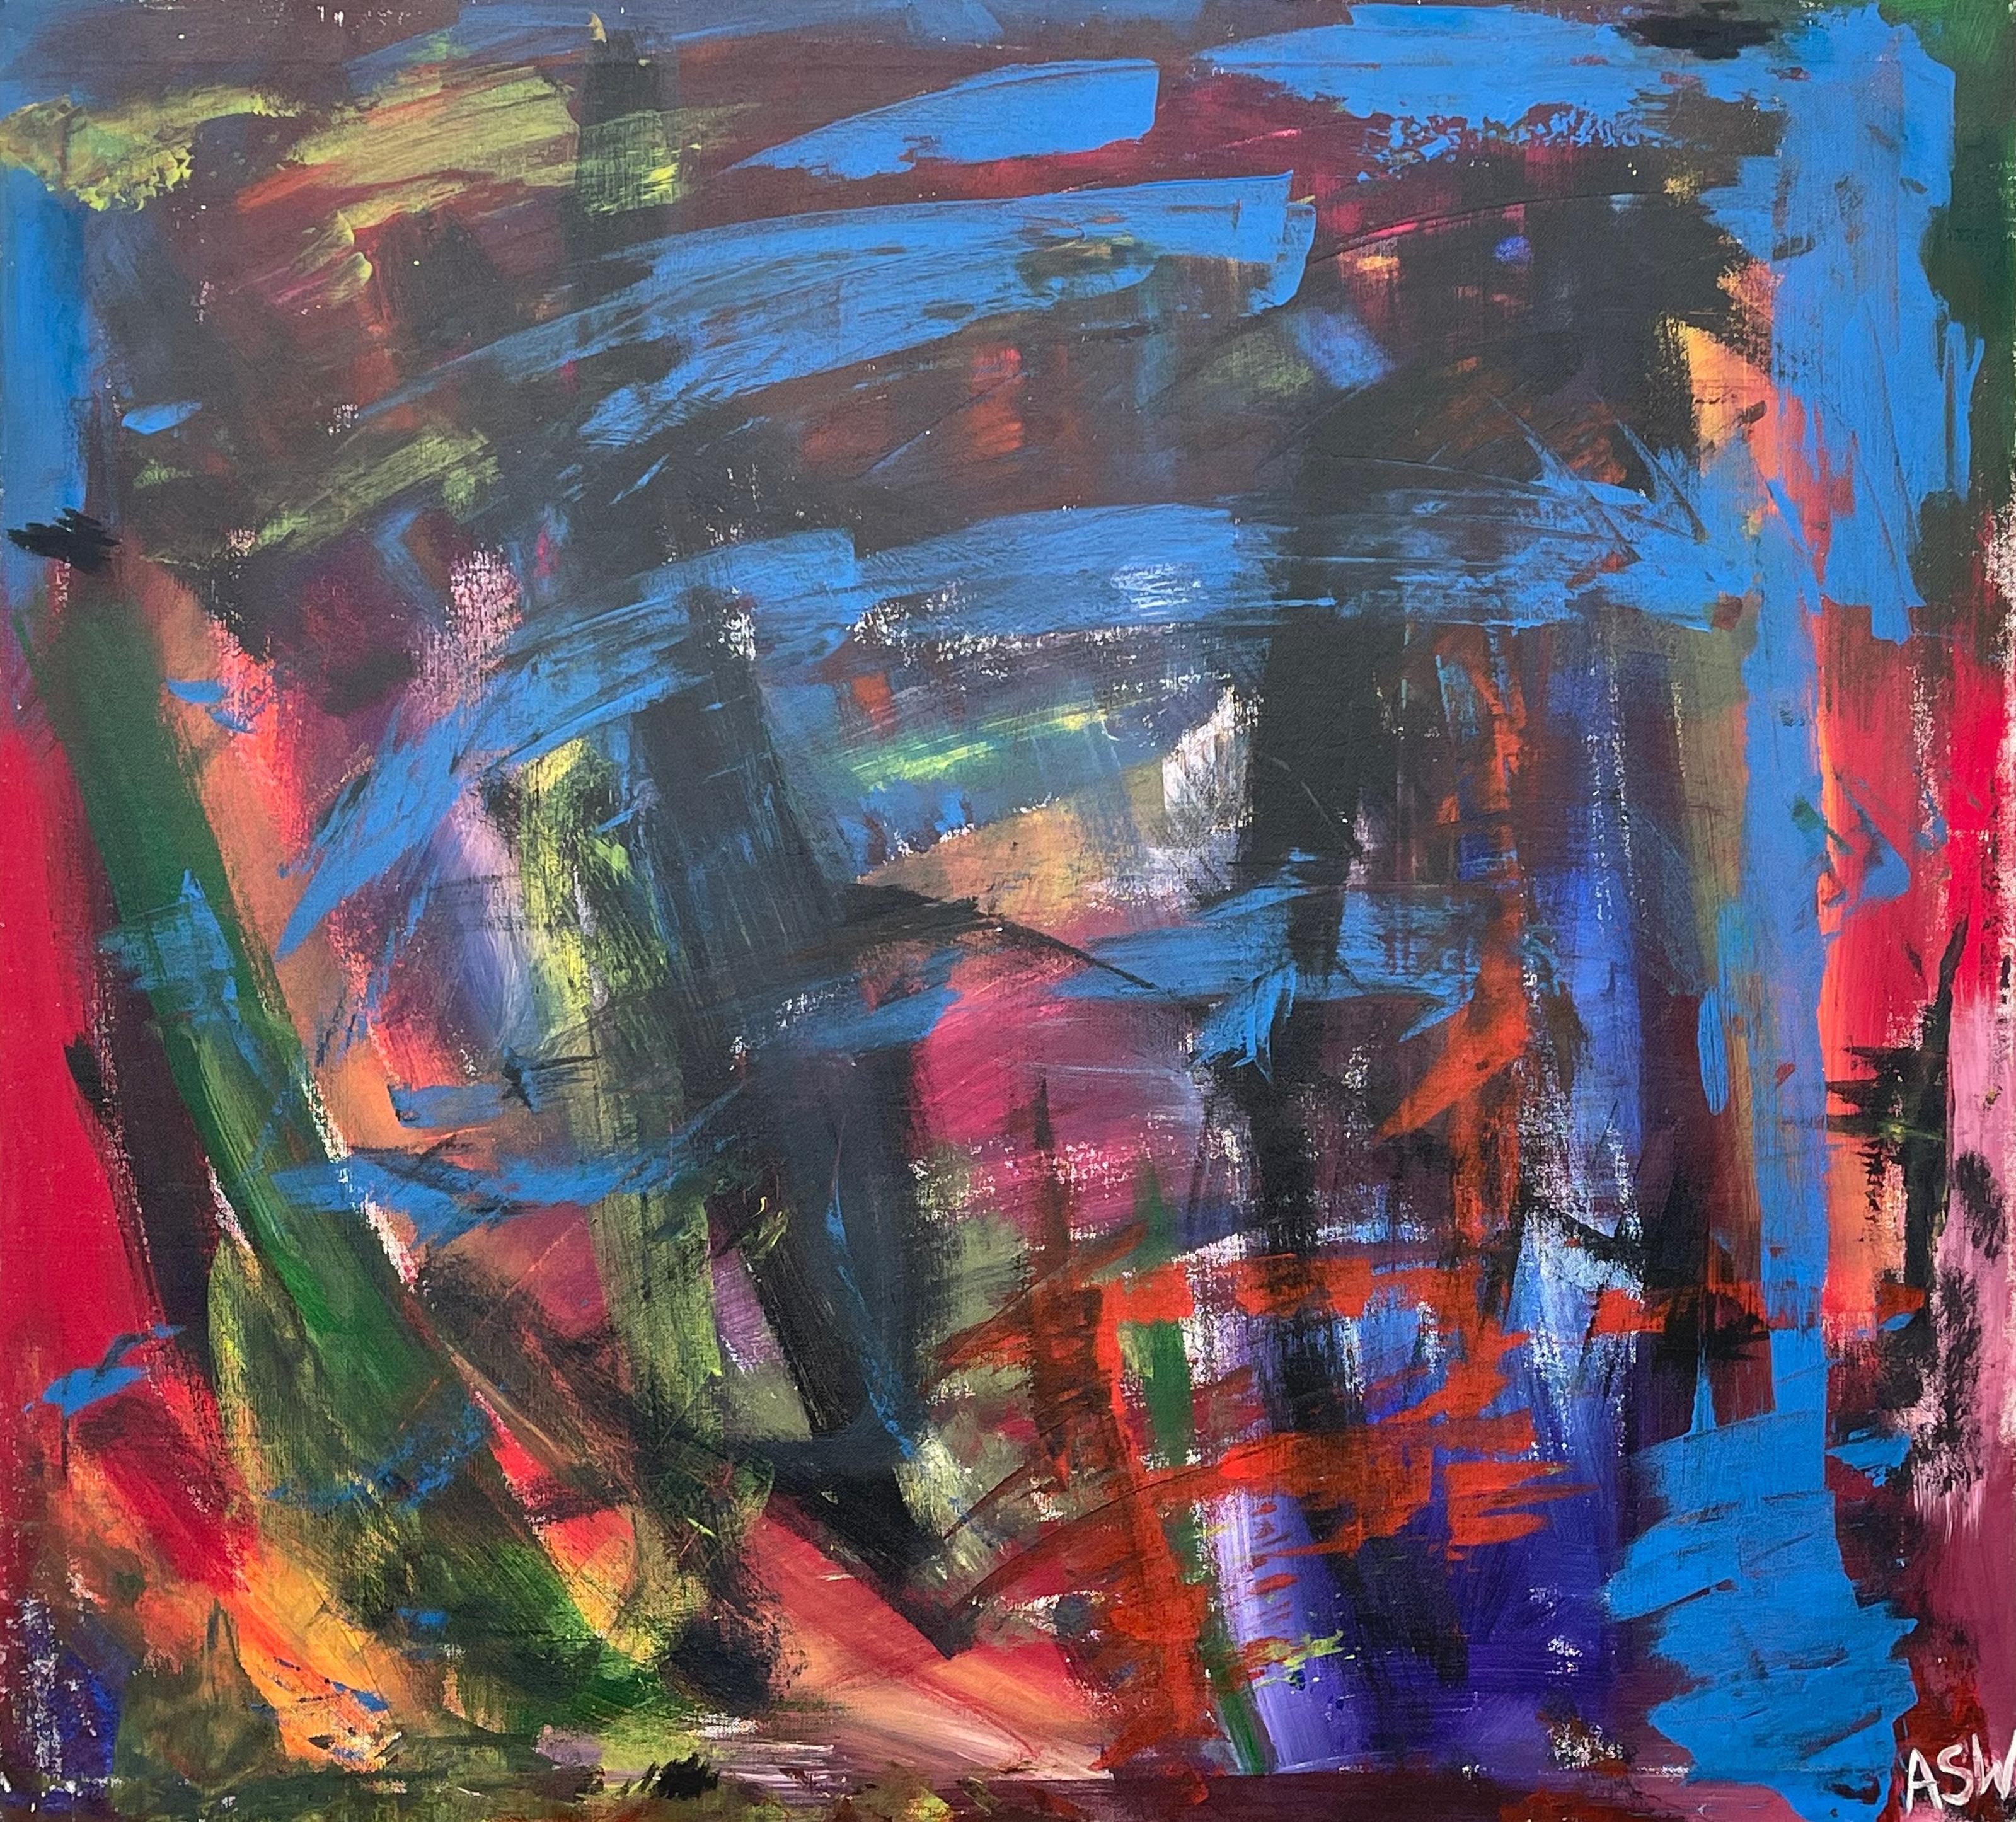 Blue Red & Green Abstract Expressionist Painting by British Contemporary Artist For Sale 13